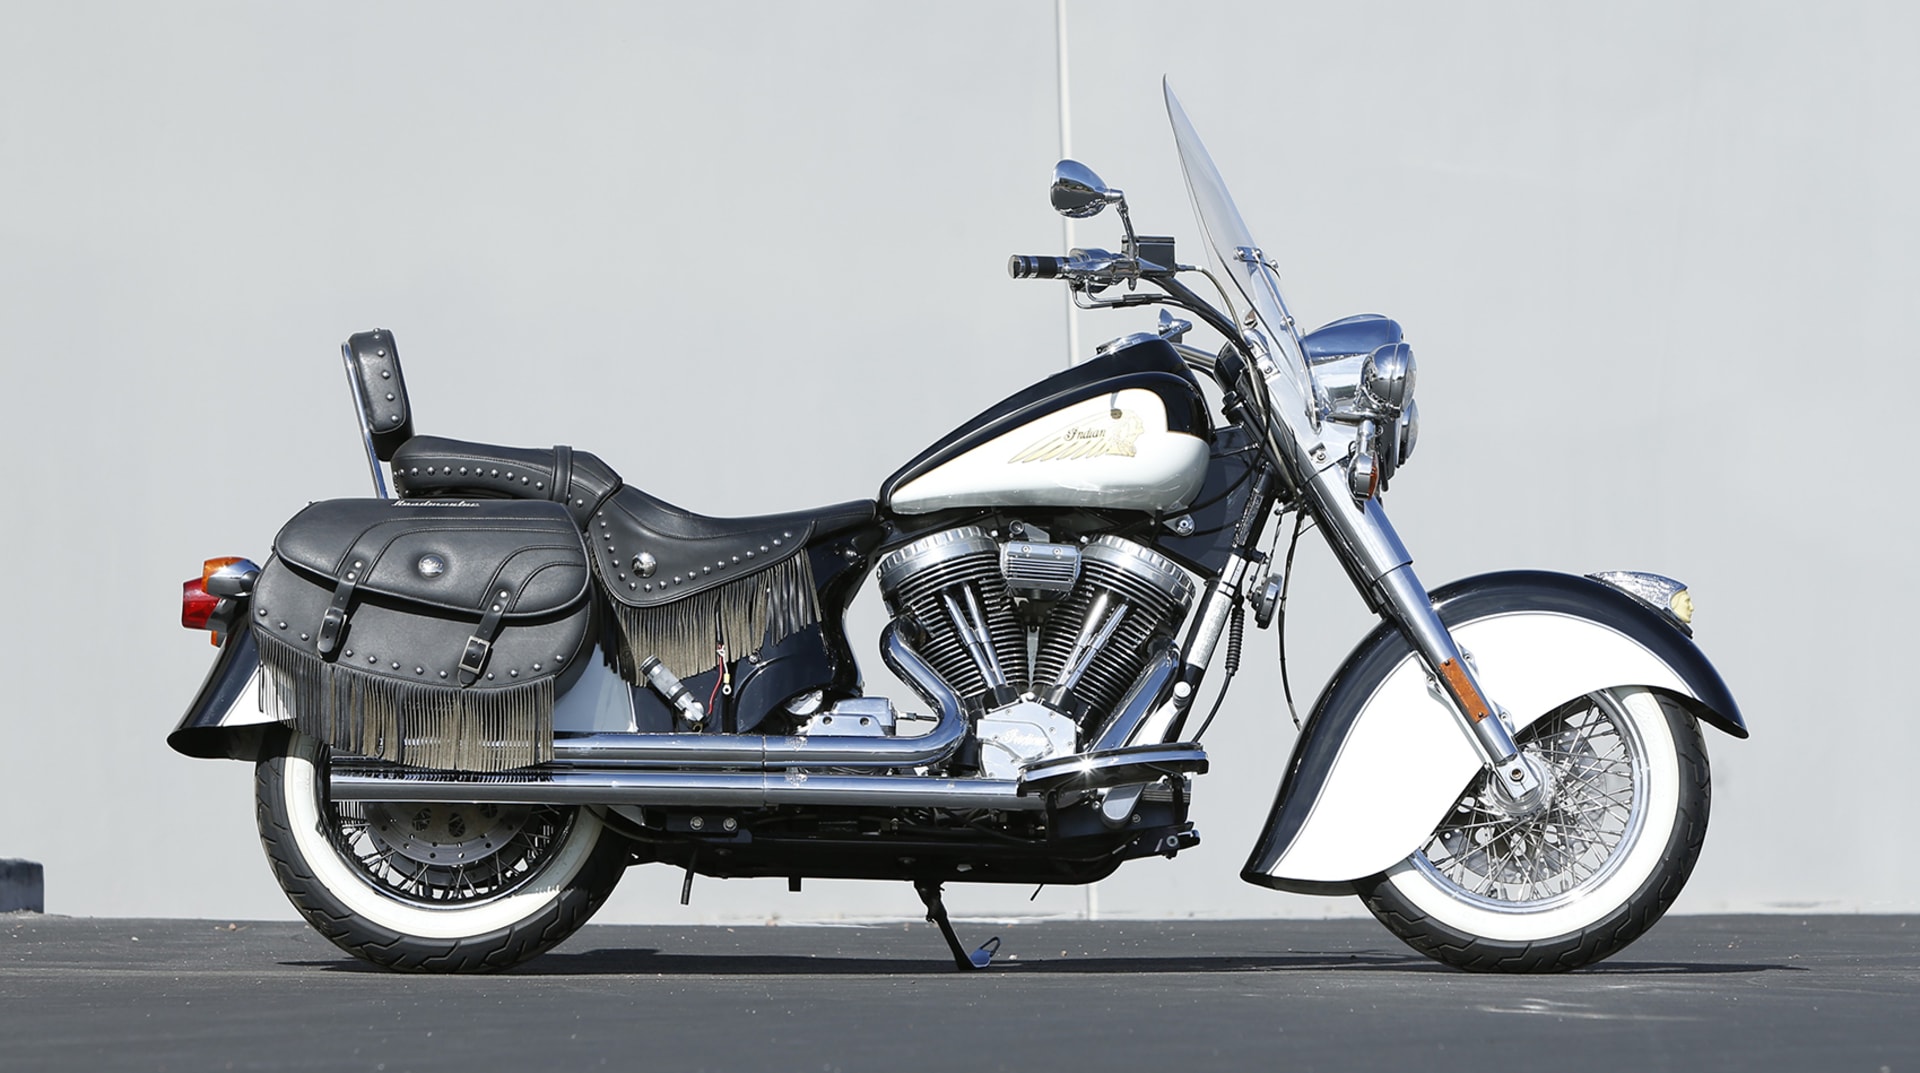 2003 Indian Chief Roadmaster for Sale at Auction - Mecum Auctions